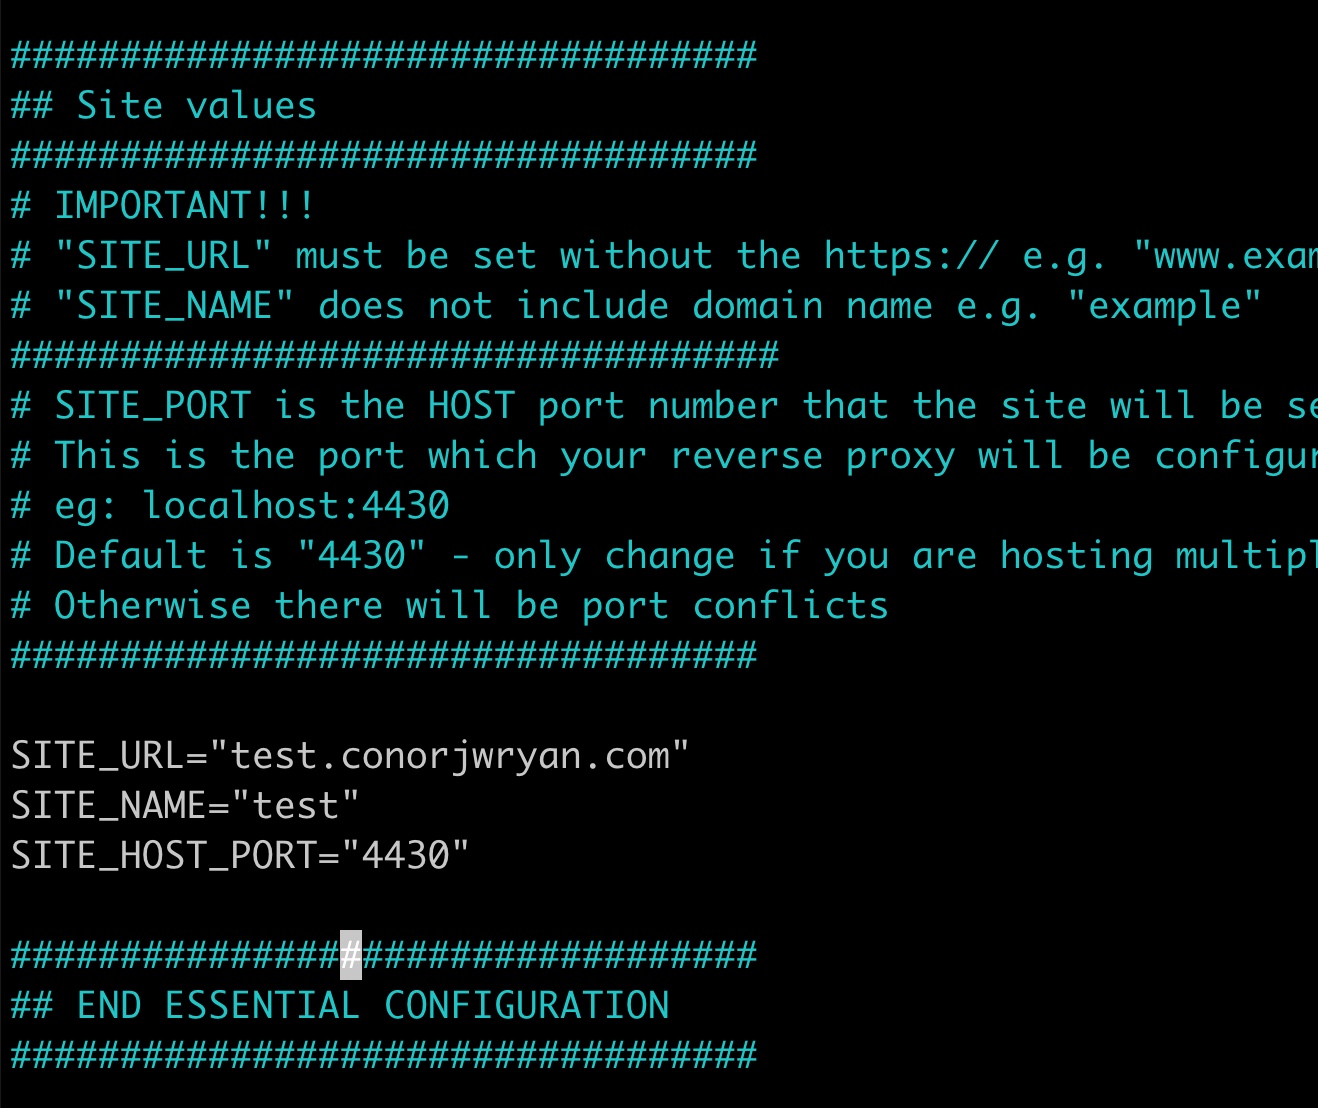 A screenshot of the terminal showing the output of 'nano .env' showing the contents of the .env file site configuration section